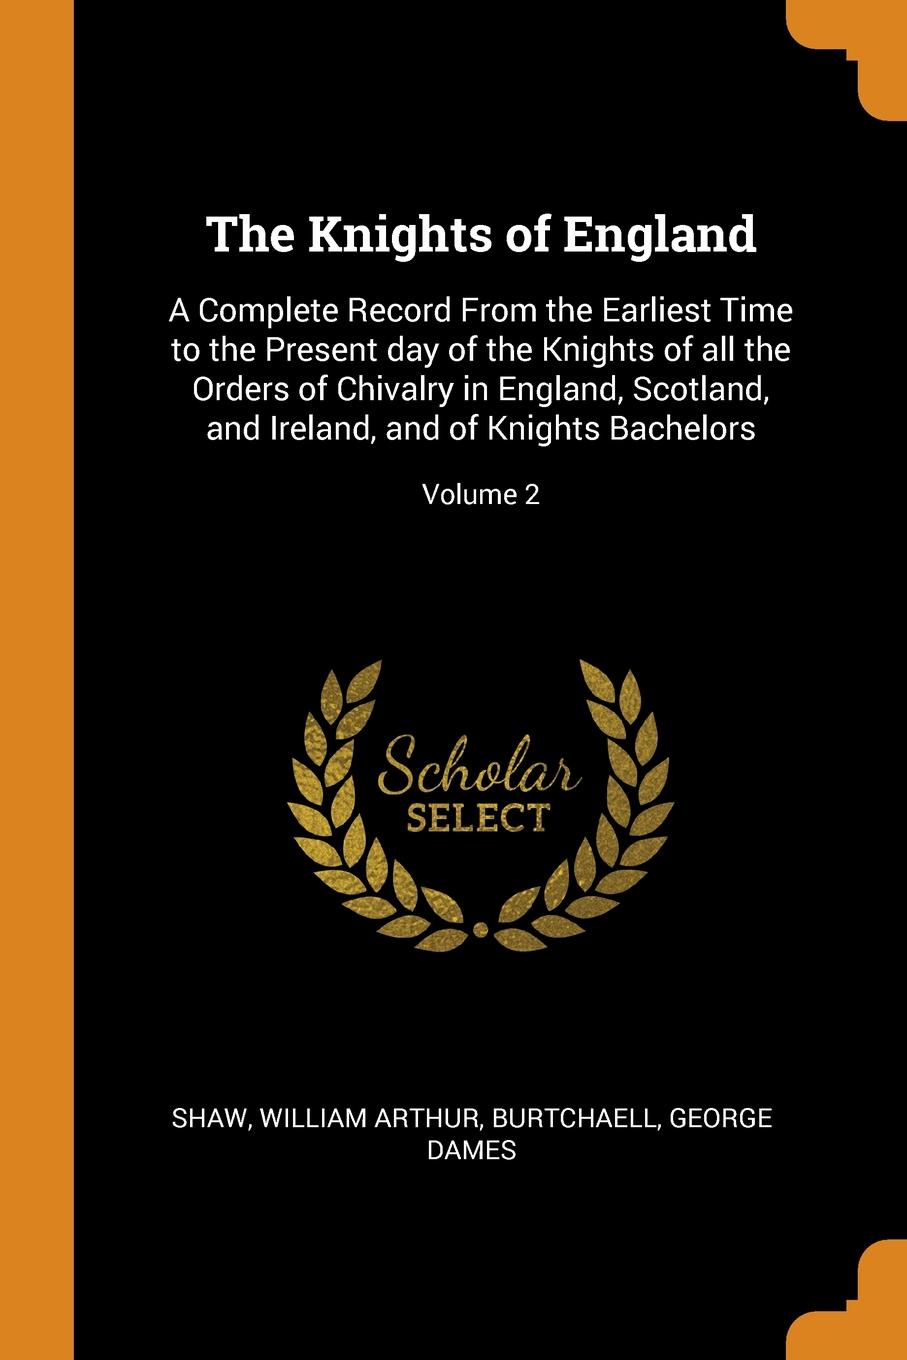 The Knights of England. A Complete Record From the Earliest Time to the Present day of the Knights of all the Orders of Chivalry in England, Scotland, and Ireland, and of Knights Bachelors; Volume 2